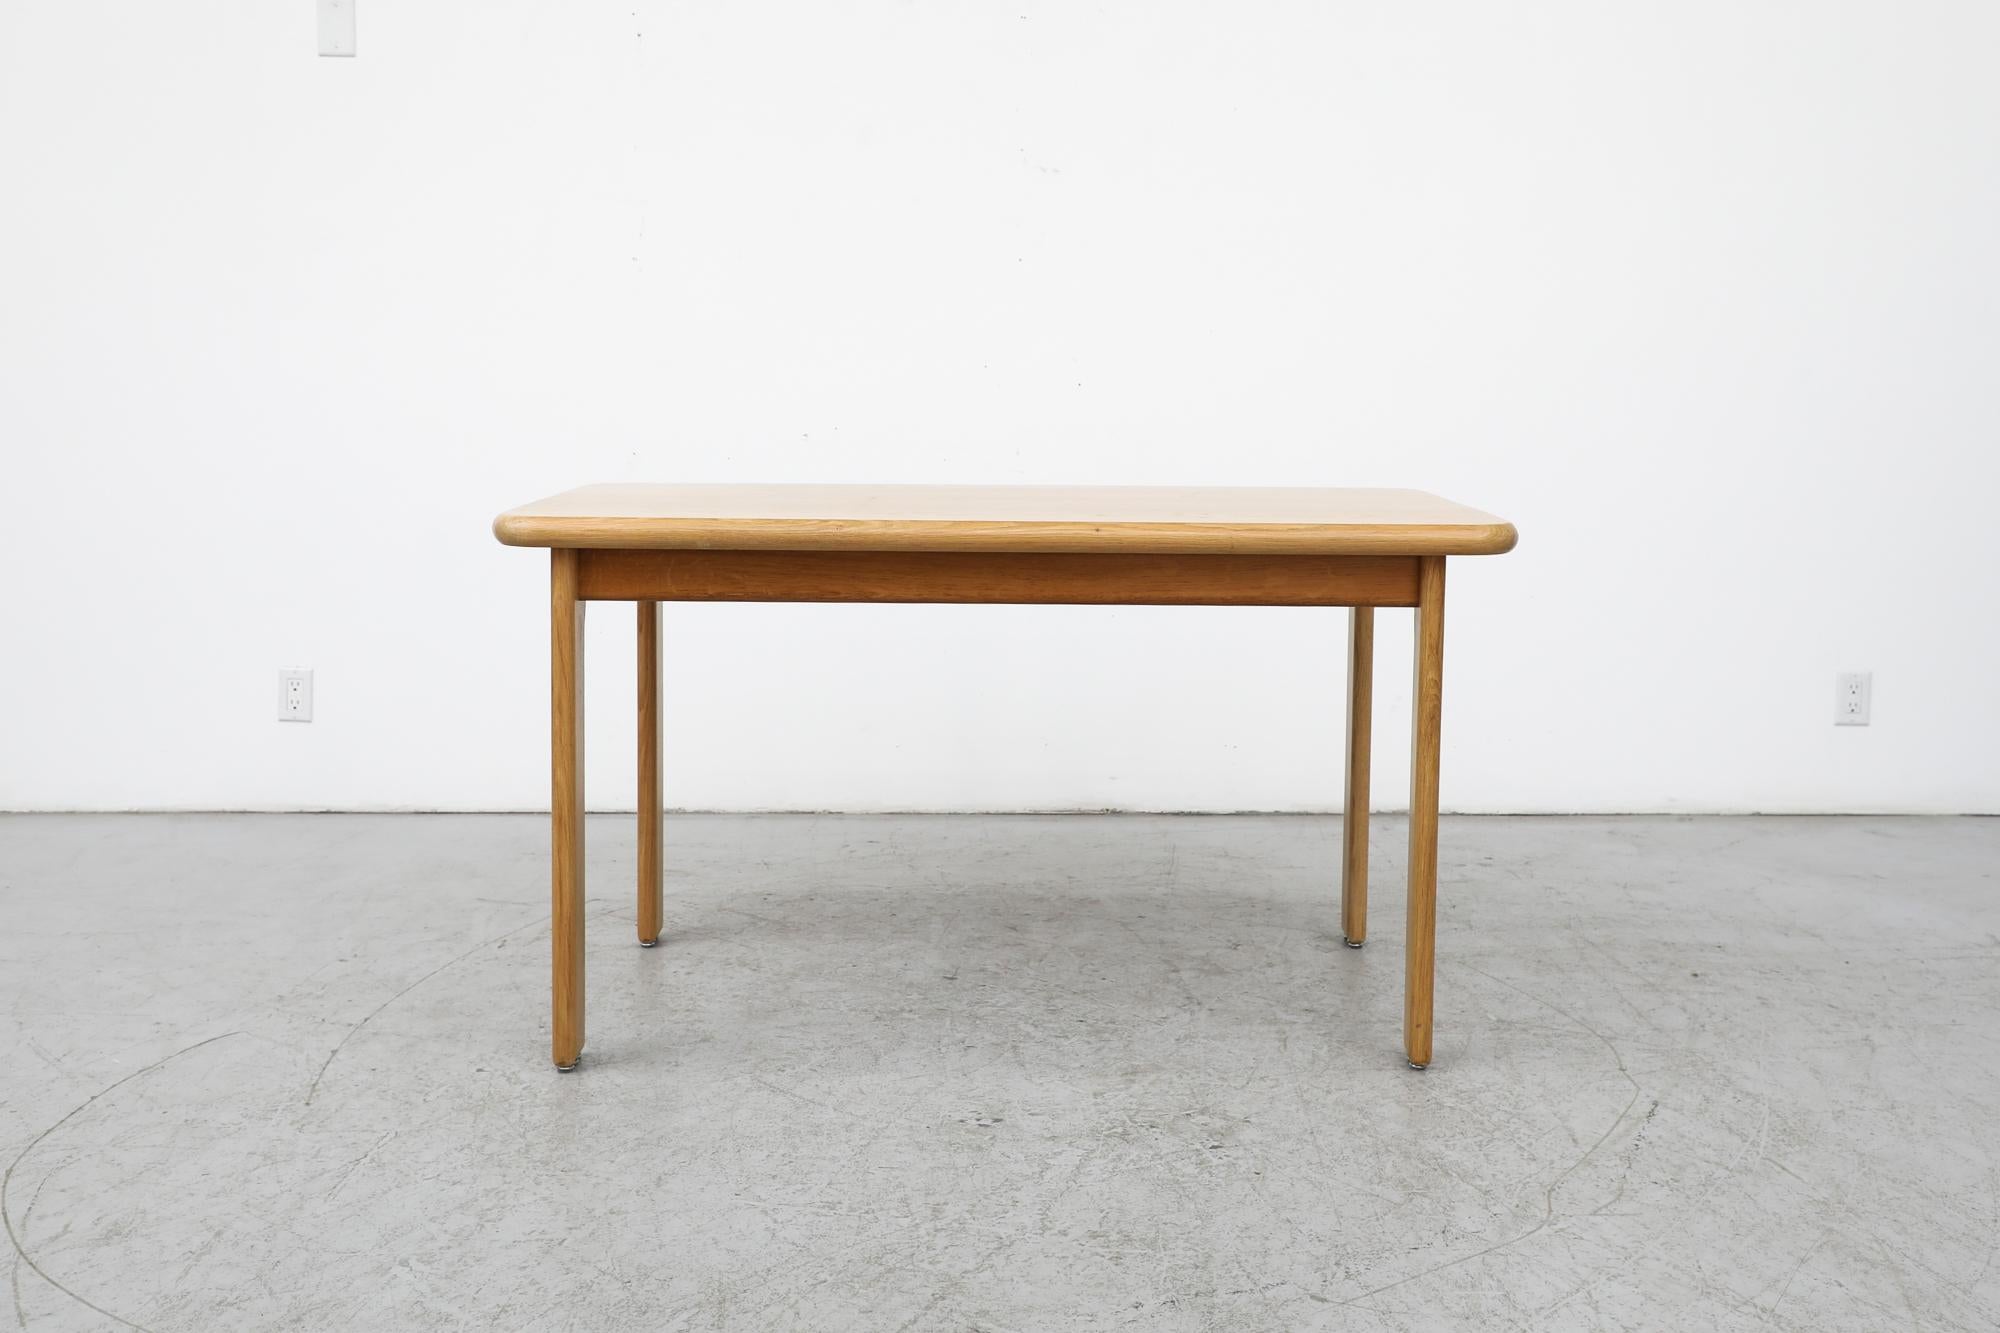 Mid-century, Rainer Daumiller style solid oak dining table with rounded, organic, soft-edged legs and rectangle top. Table is in original condition with some visible wear consistent with its age and use. A lovely example of light and open design